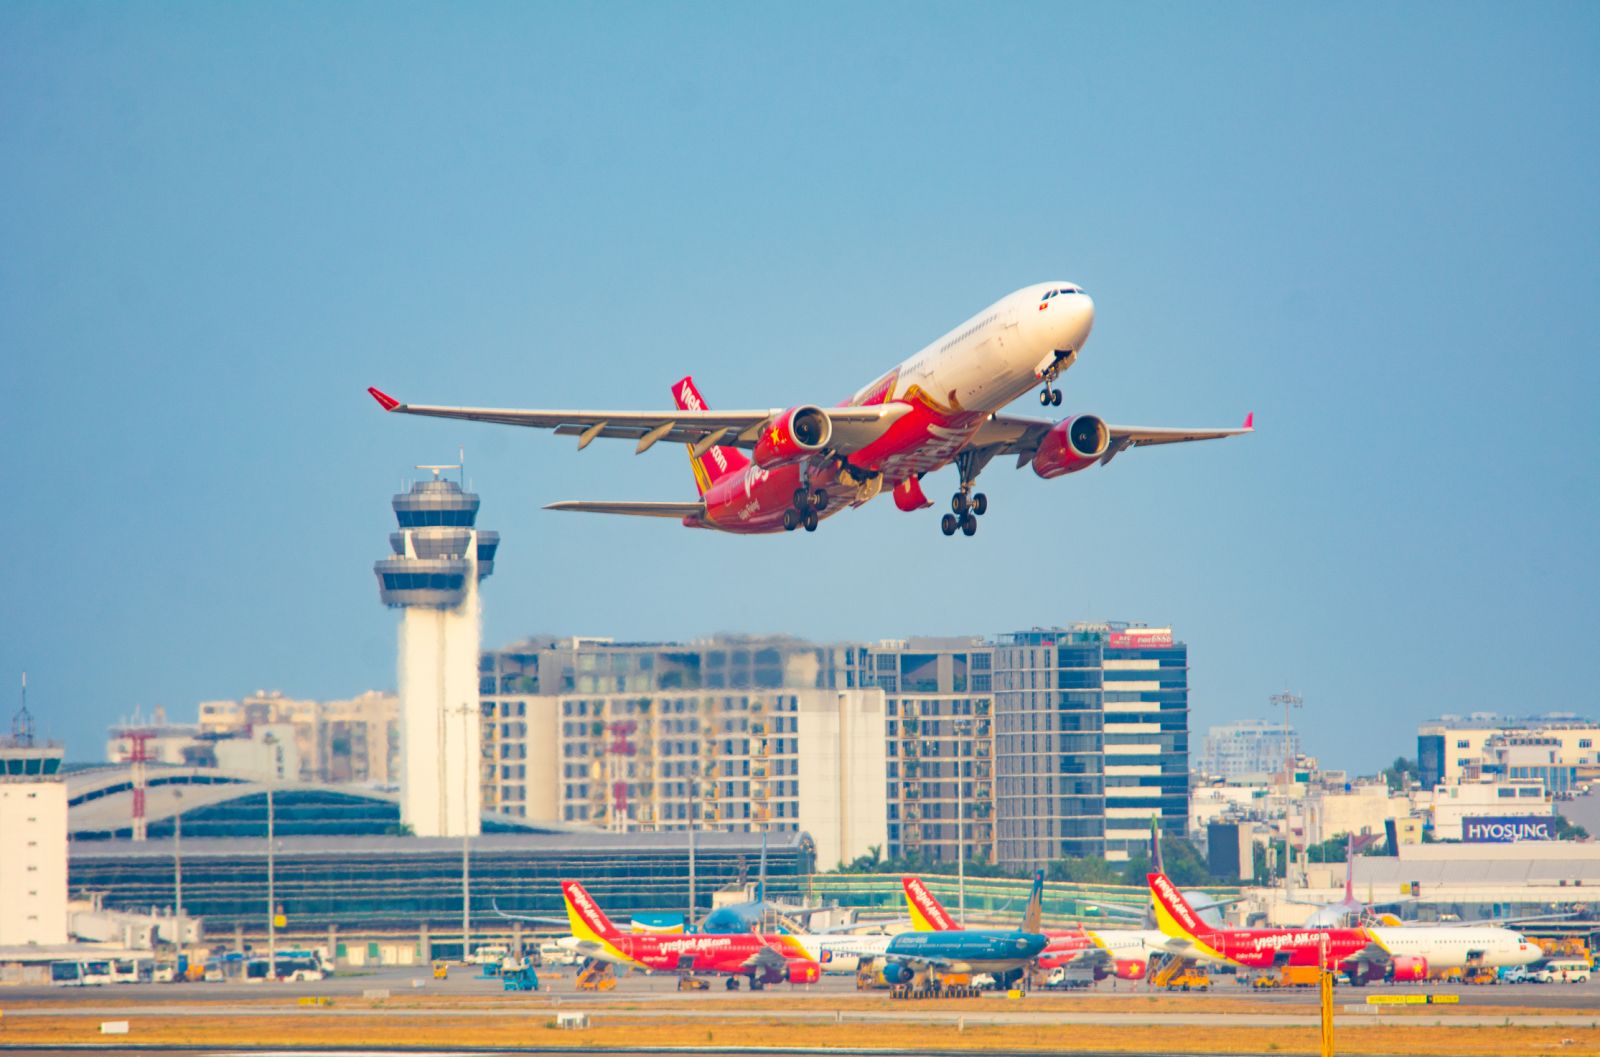 Get ready for your unforgettable trips to Vietnam and beyond with Vietjet